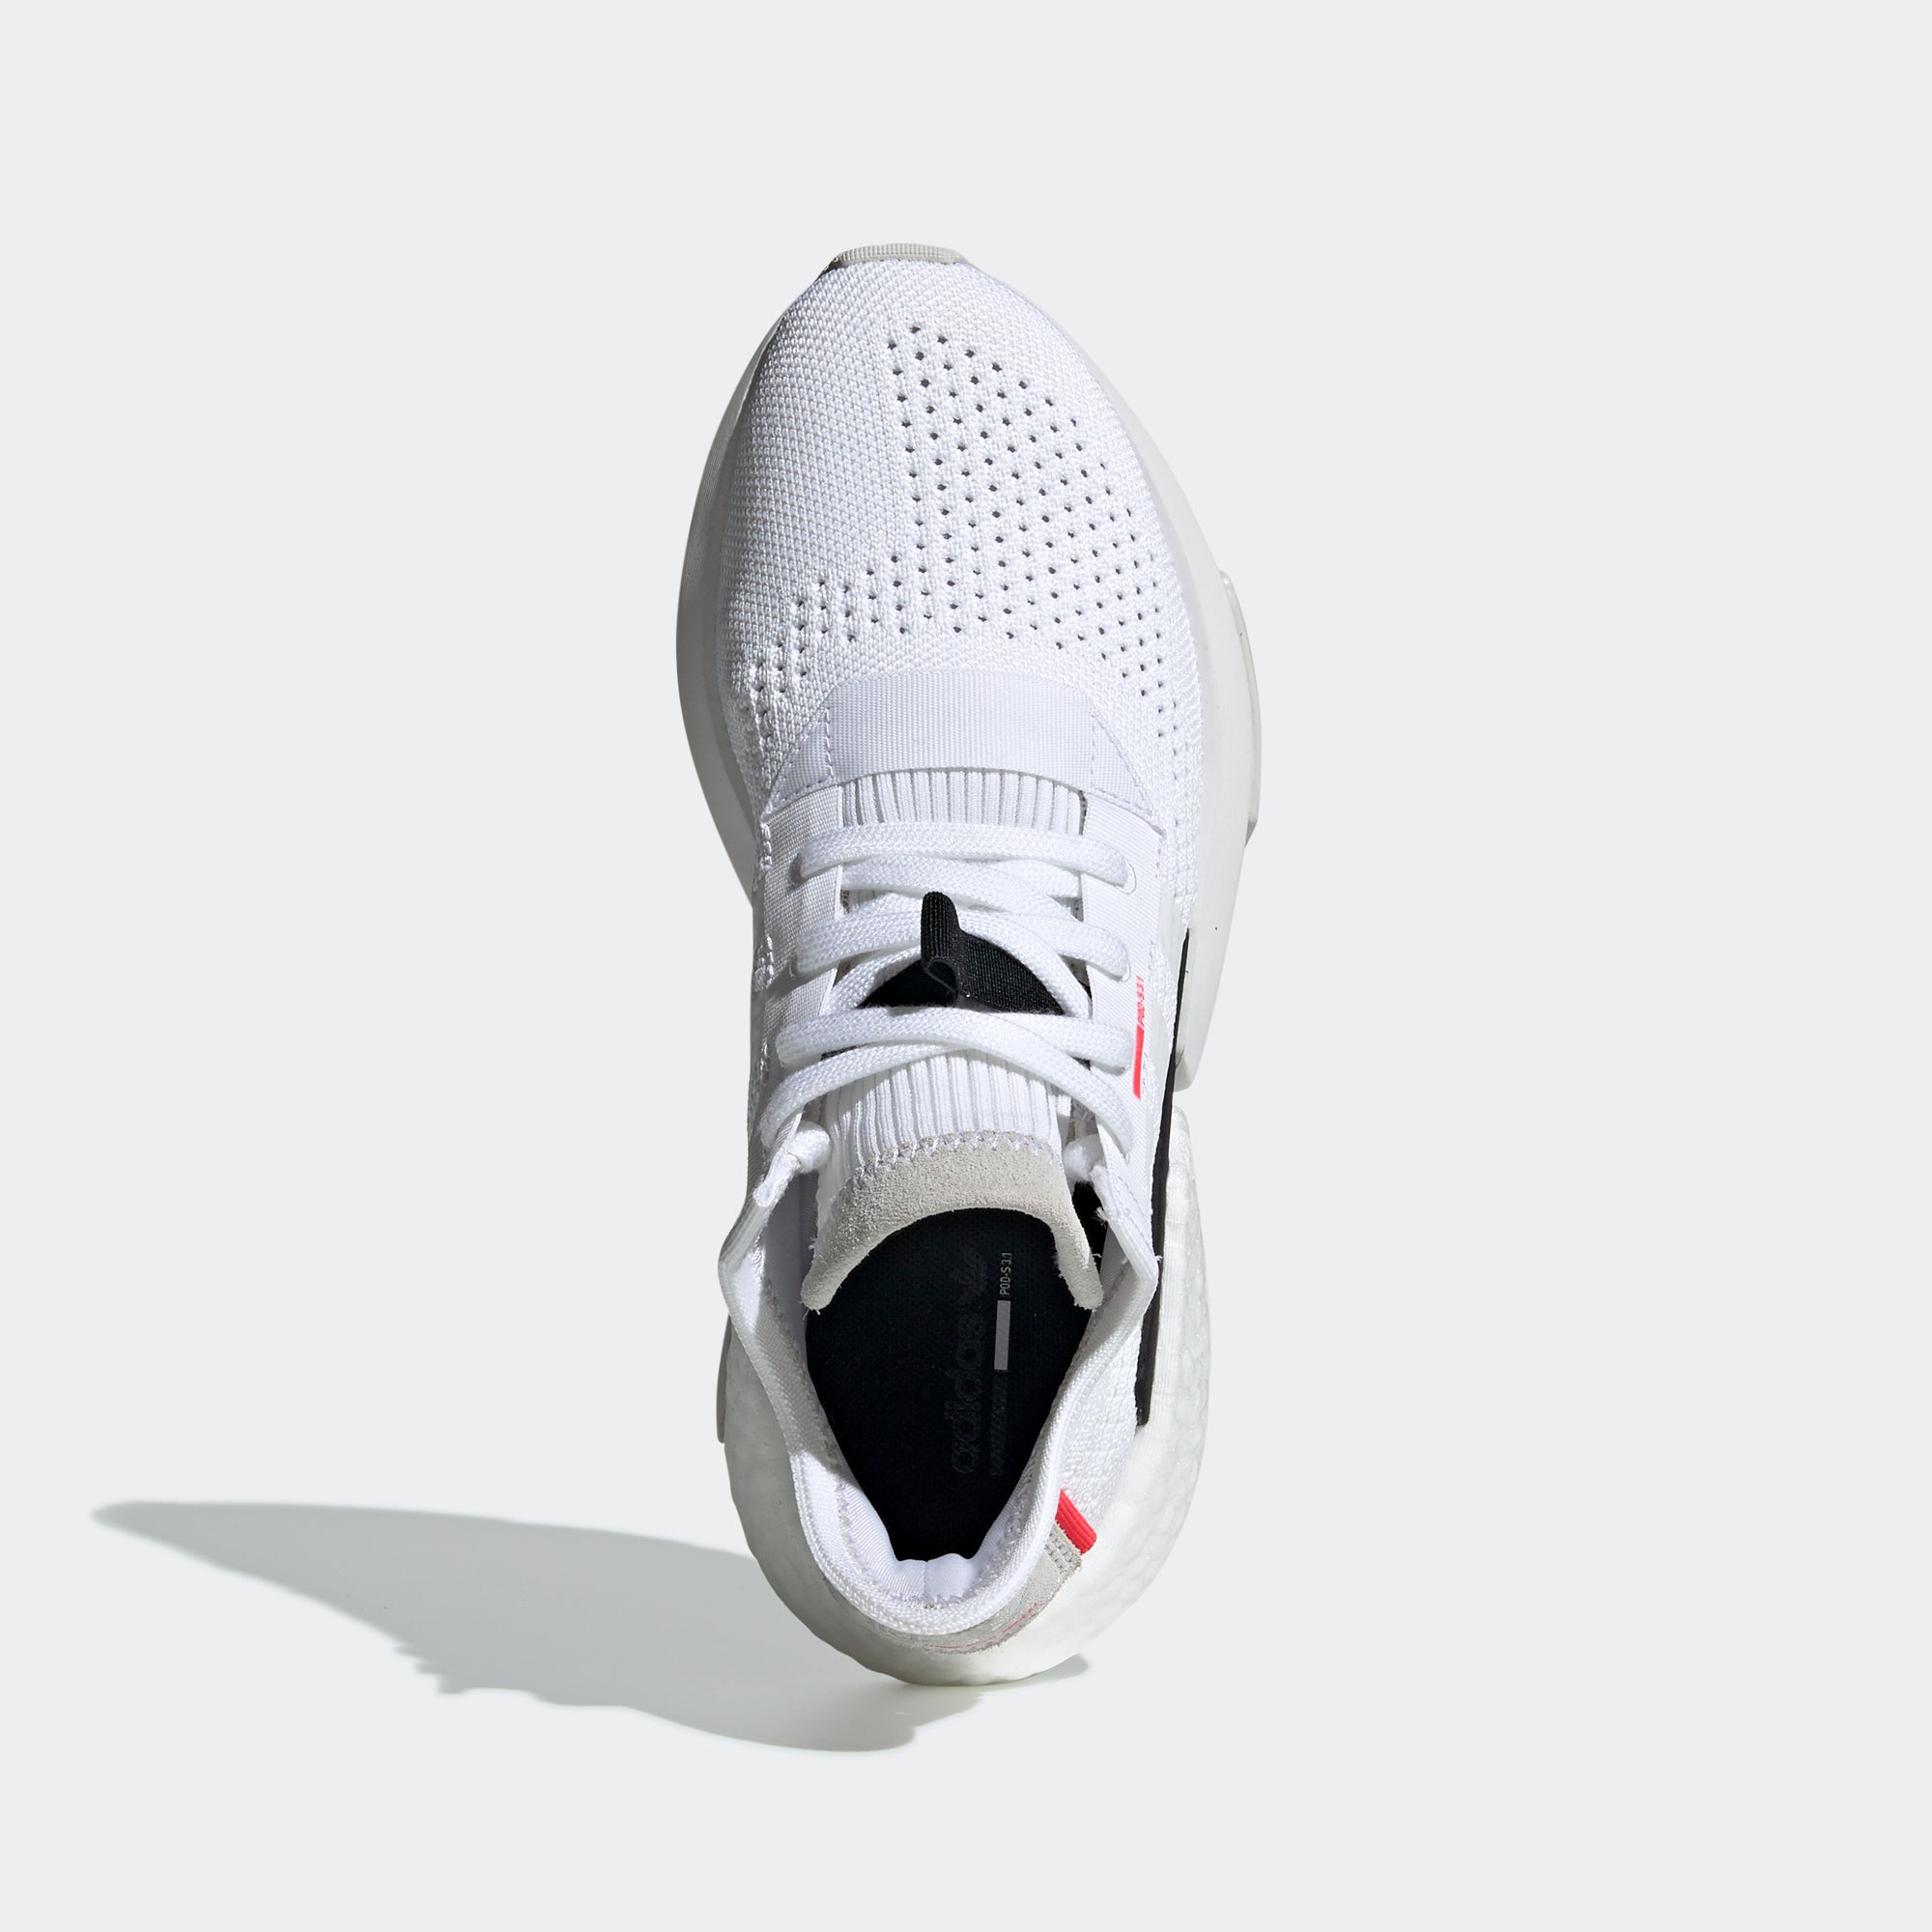 adidas POD-S3.1 Shoes White Red G27946 